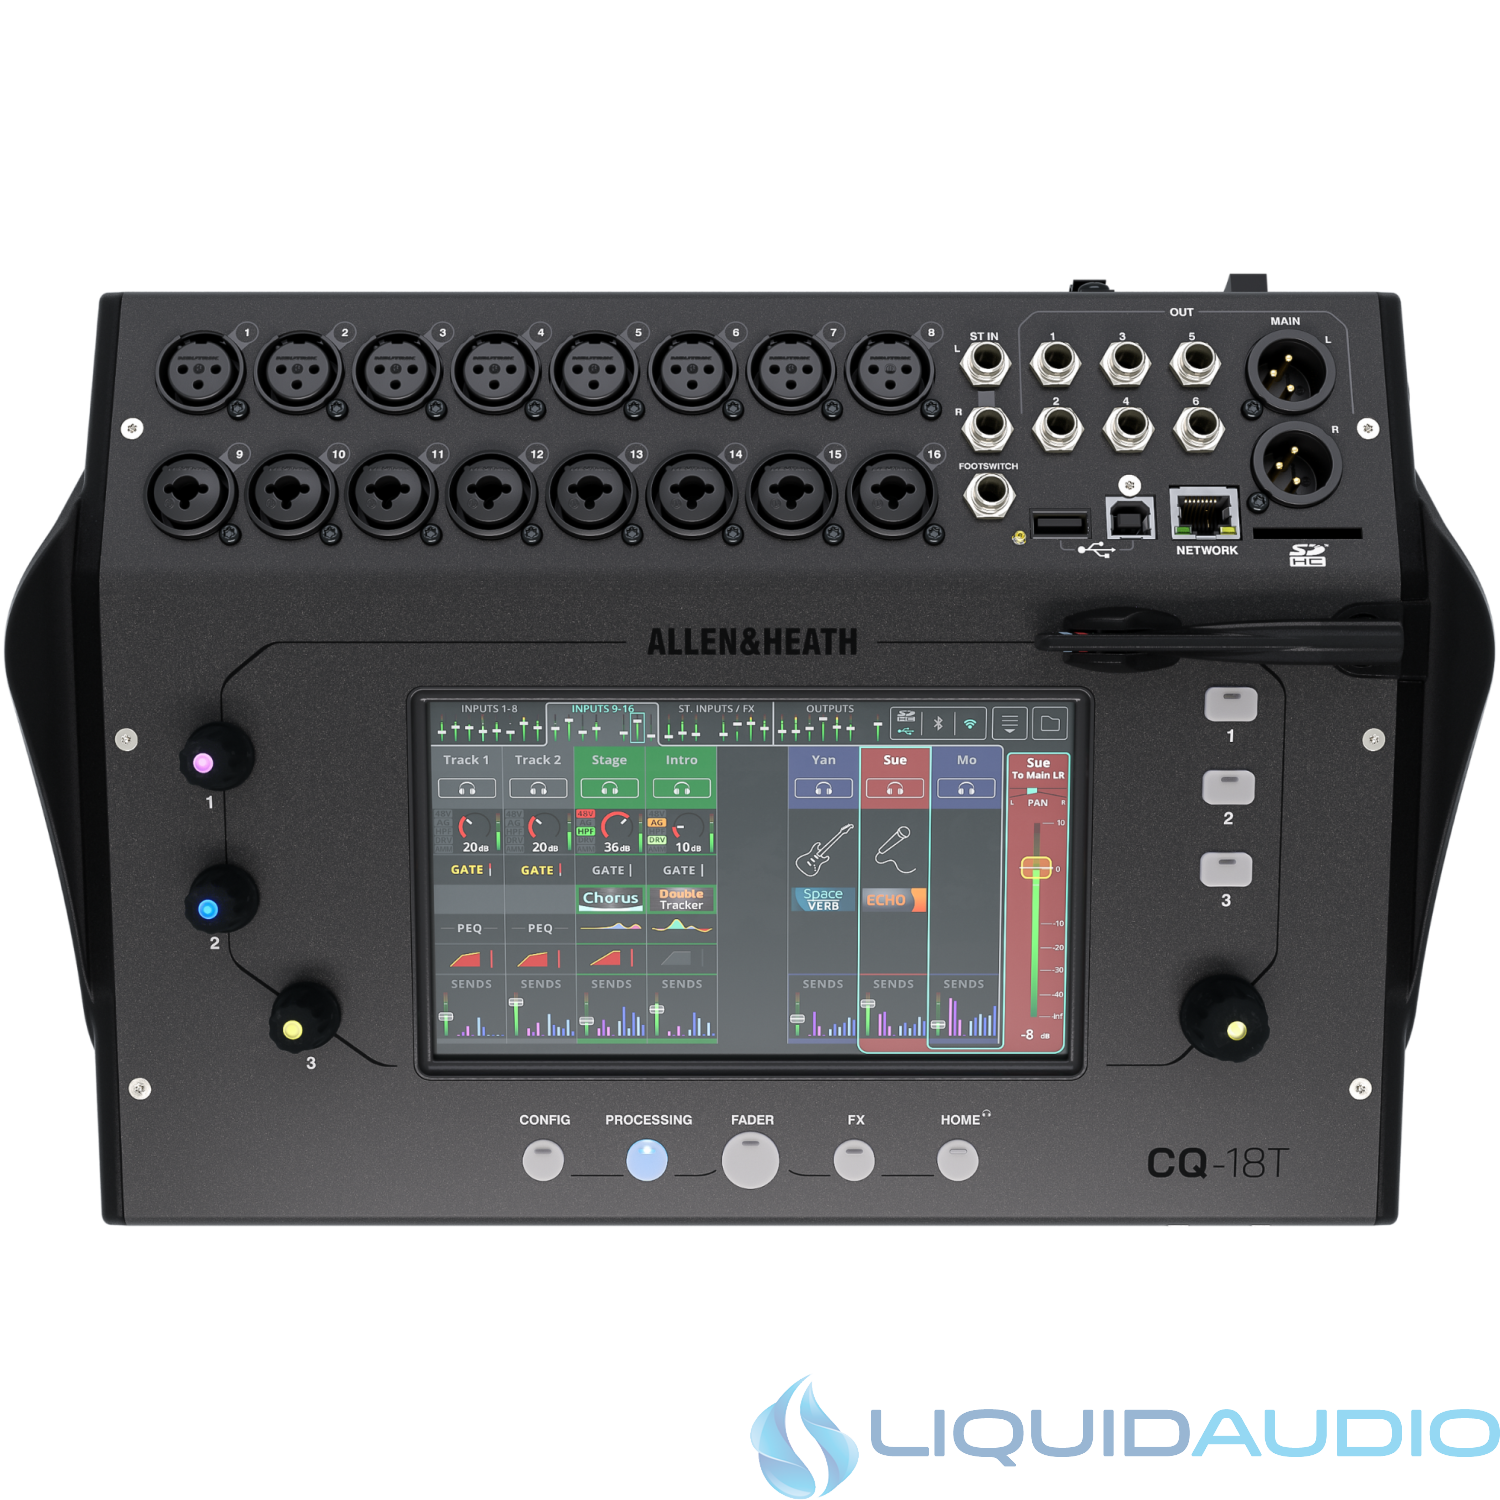 Allen & Heath CQ-18T Digital Mixer with 7" Touchscreen WiFi and Bluetooth Connectivity